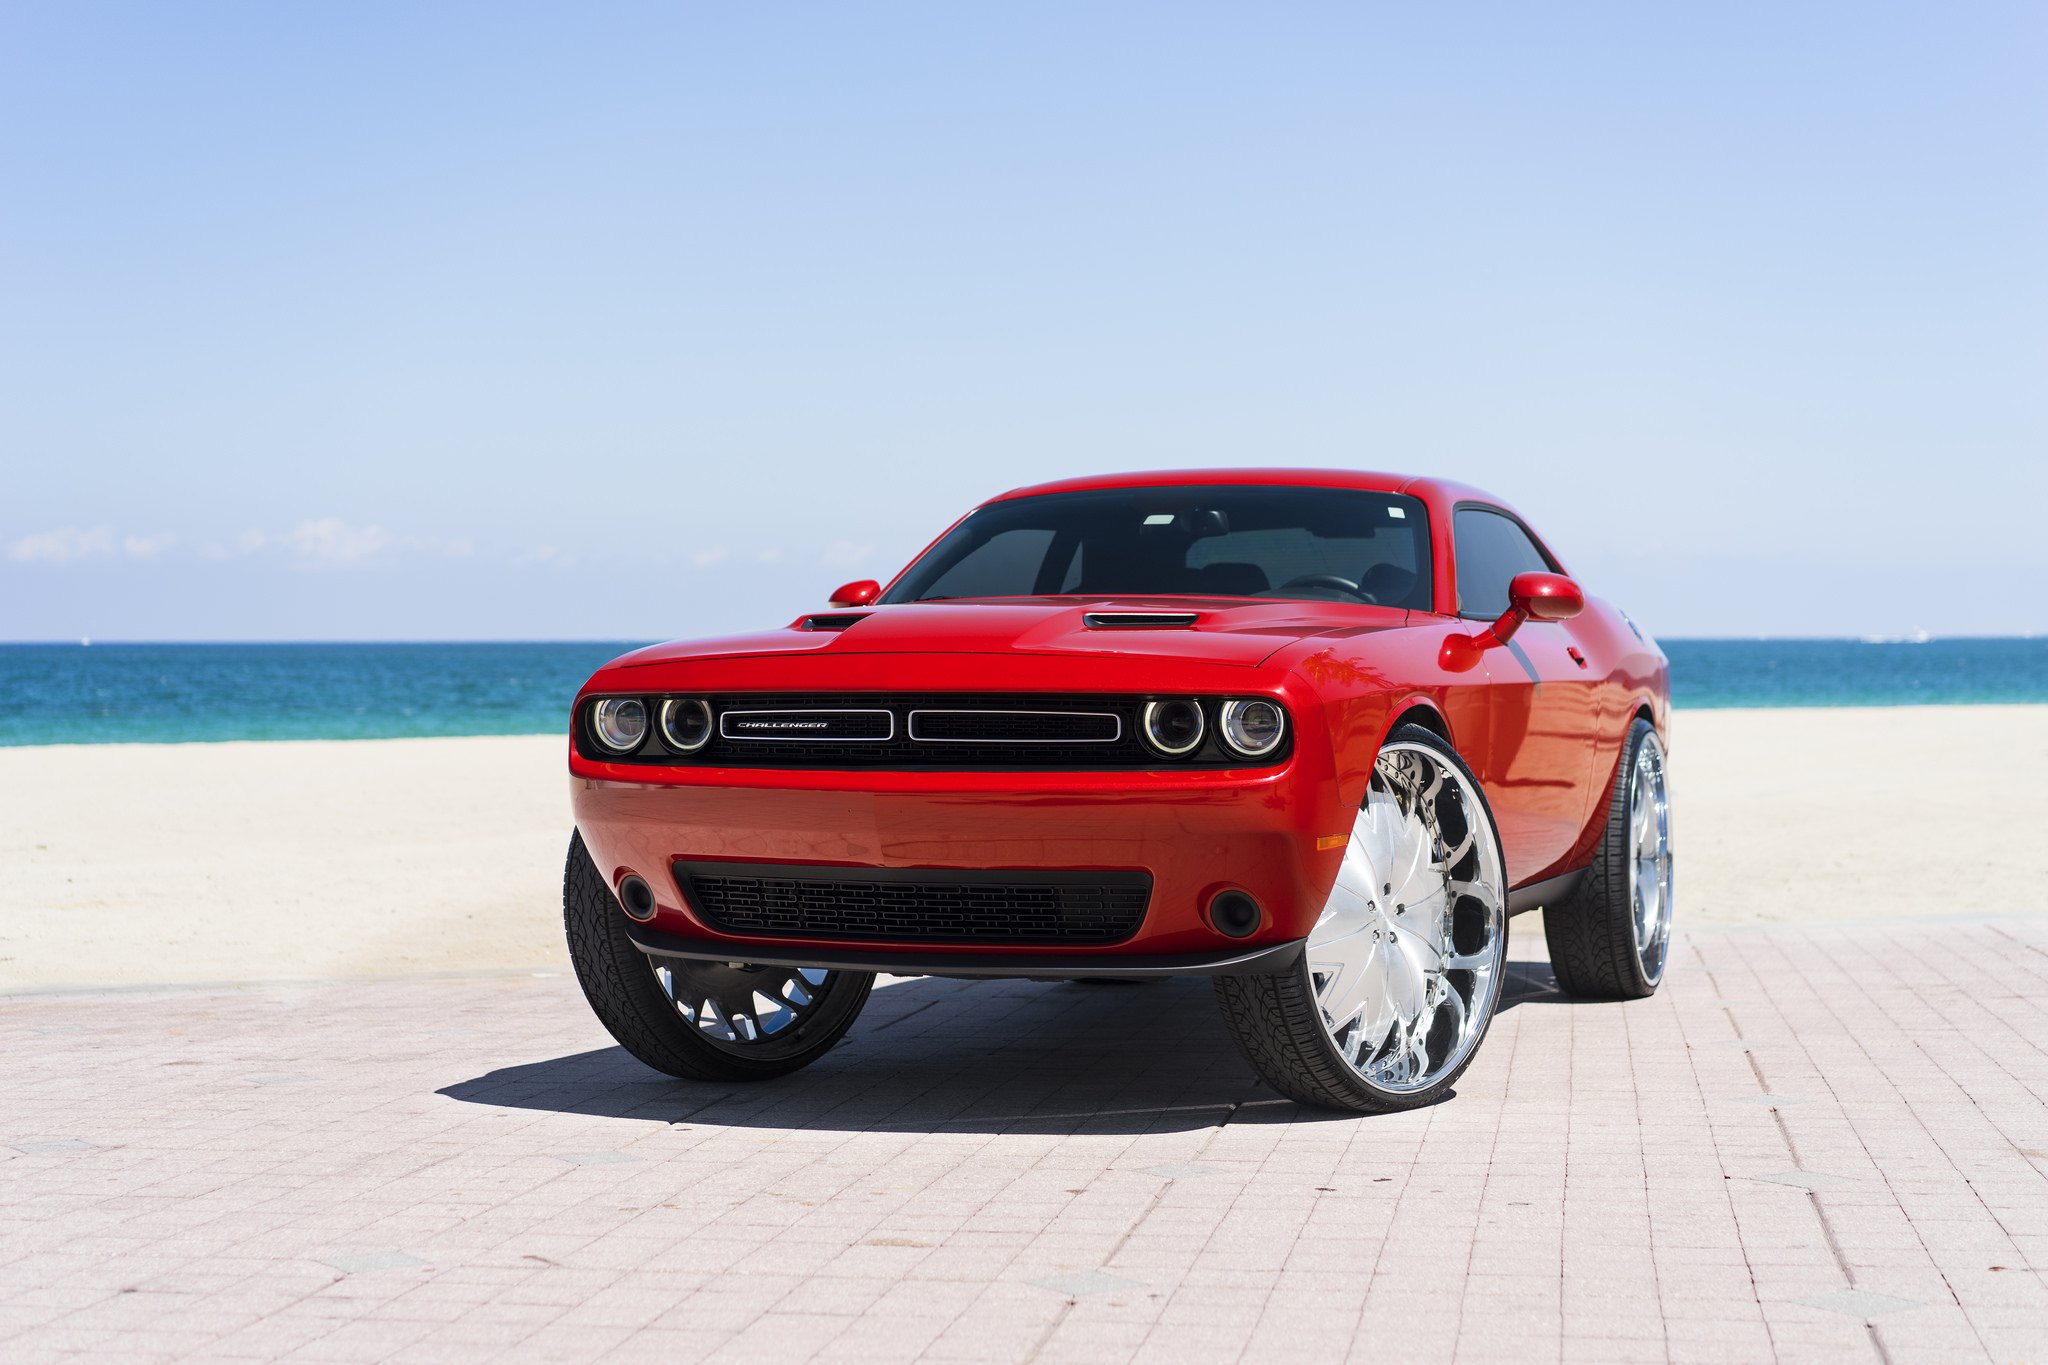 Red Dodge Challenger with Custom DBU Wheels - Photo by DUB